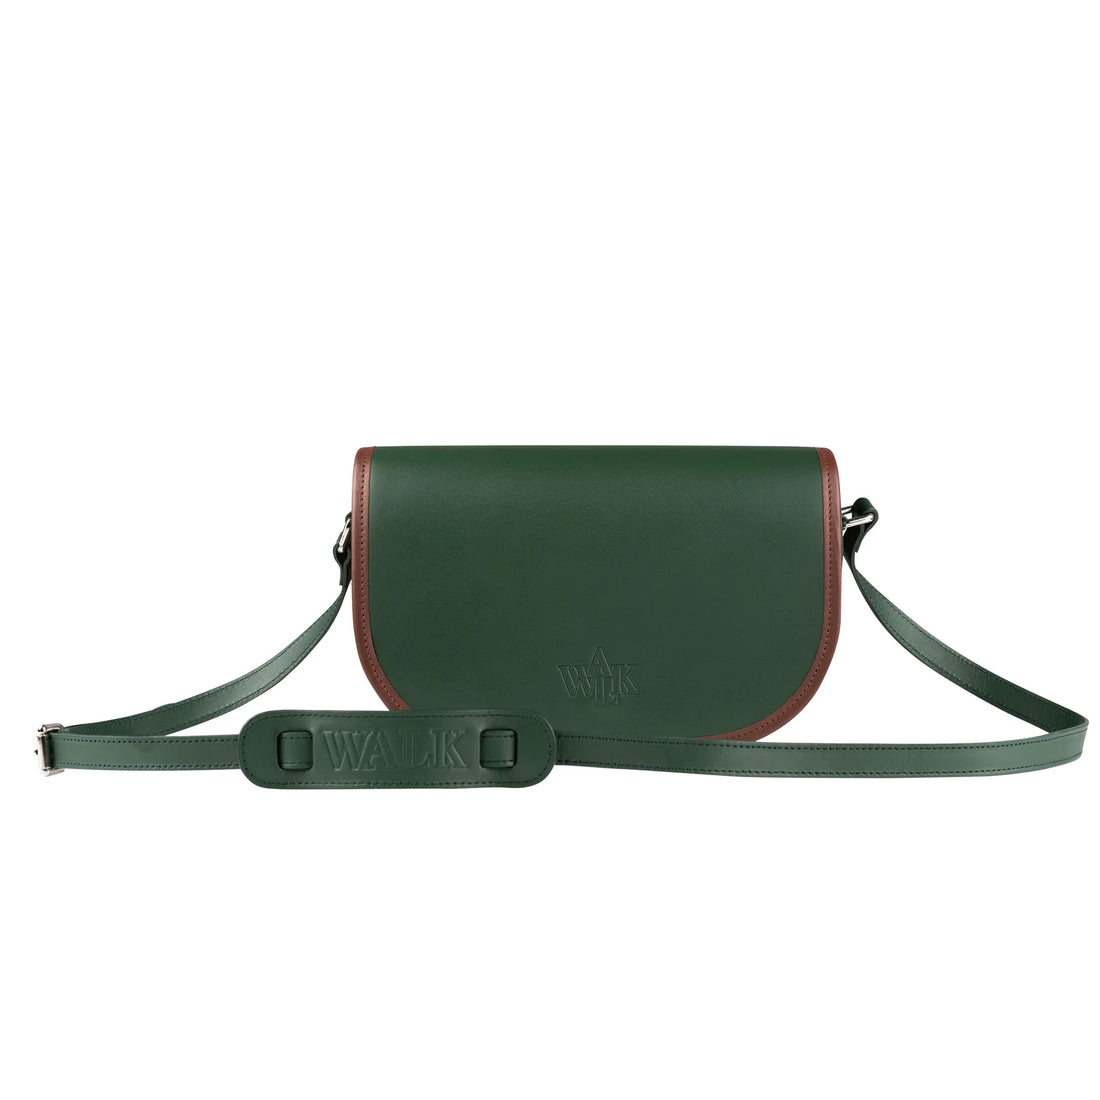 THE FOREST GREEN LEATHER BAG